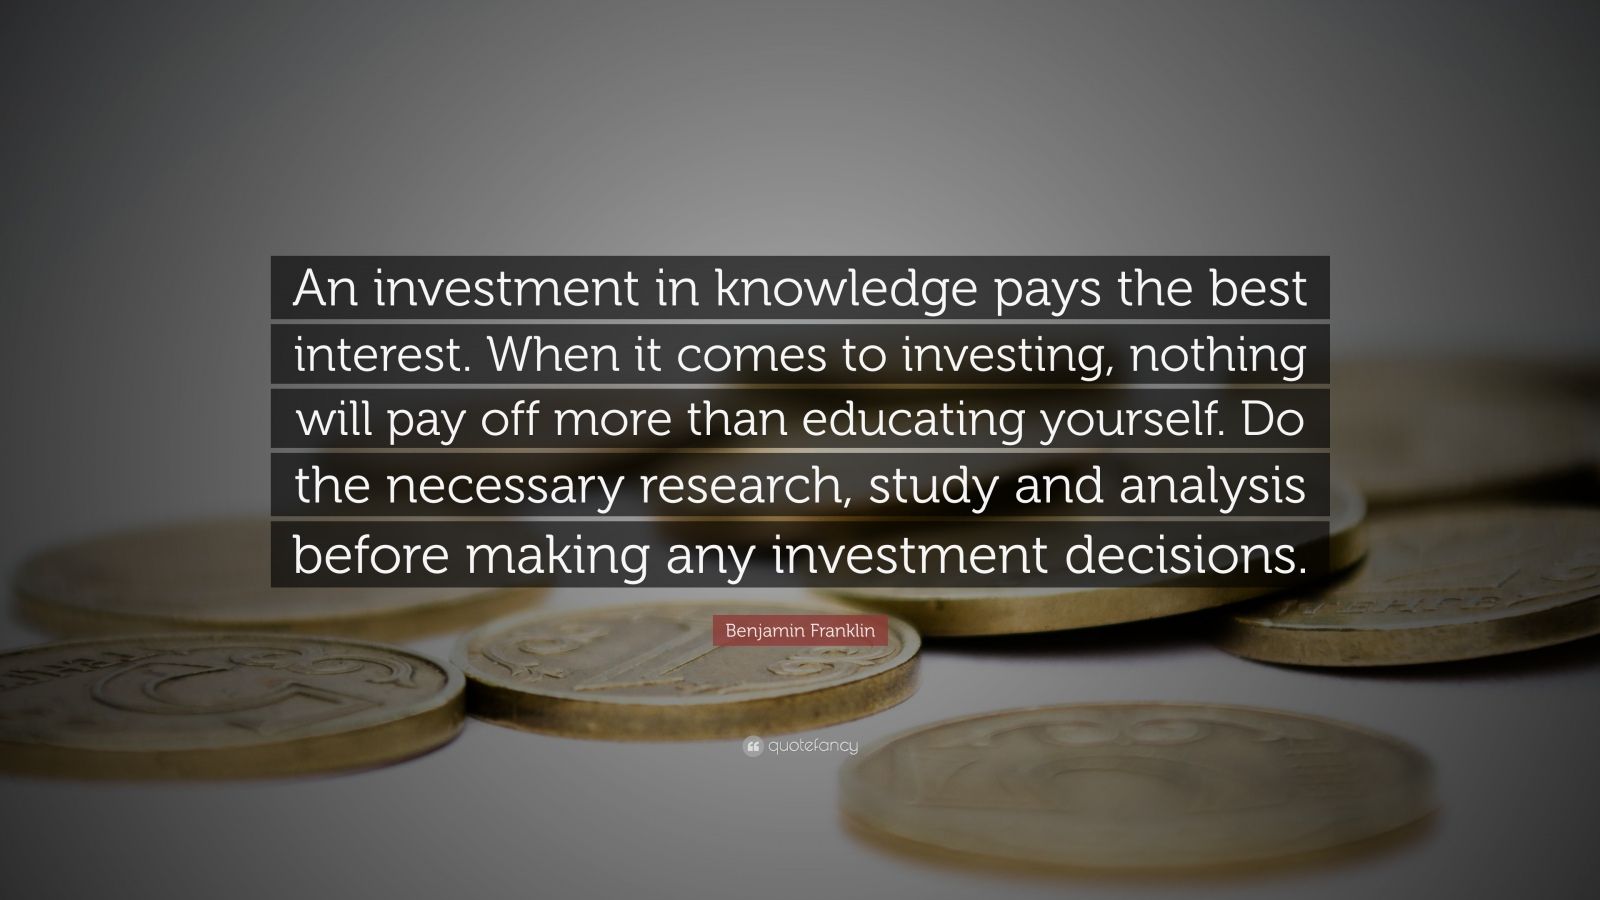 Benjamin Franklin Quote: “An investment in knowledge pays the best